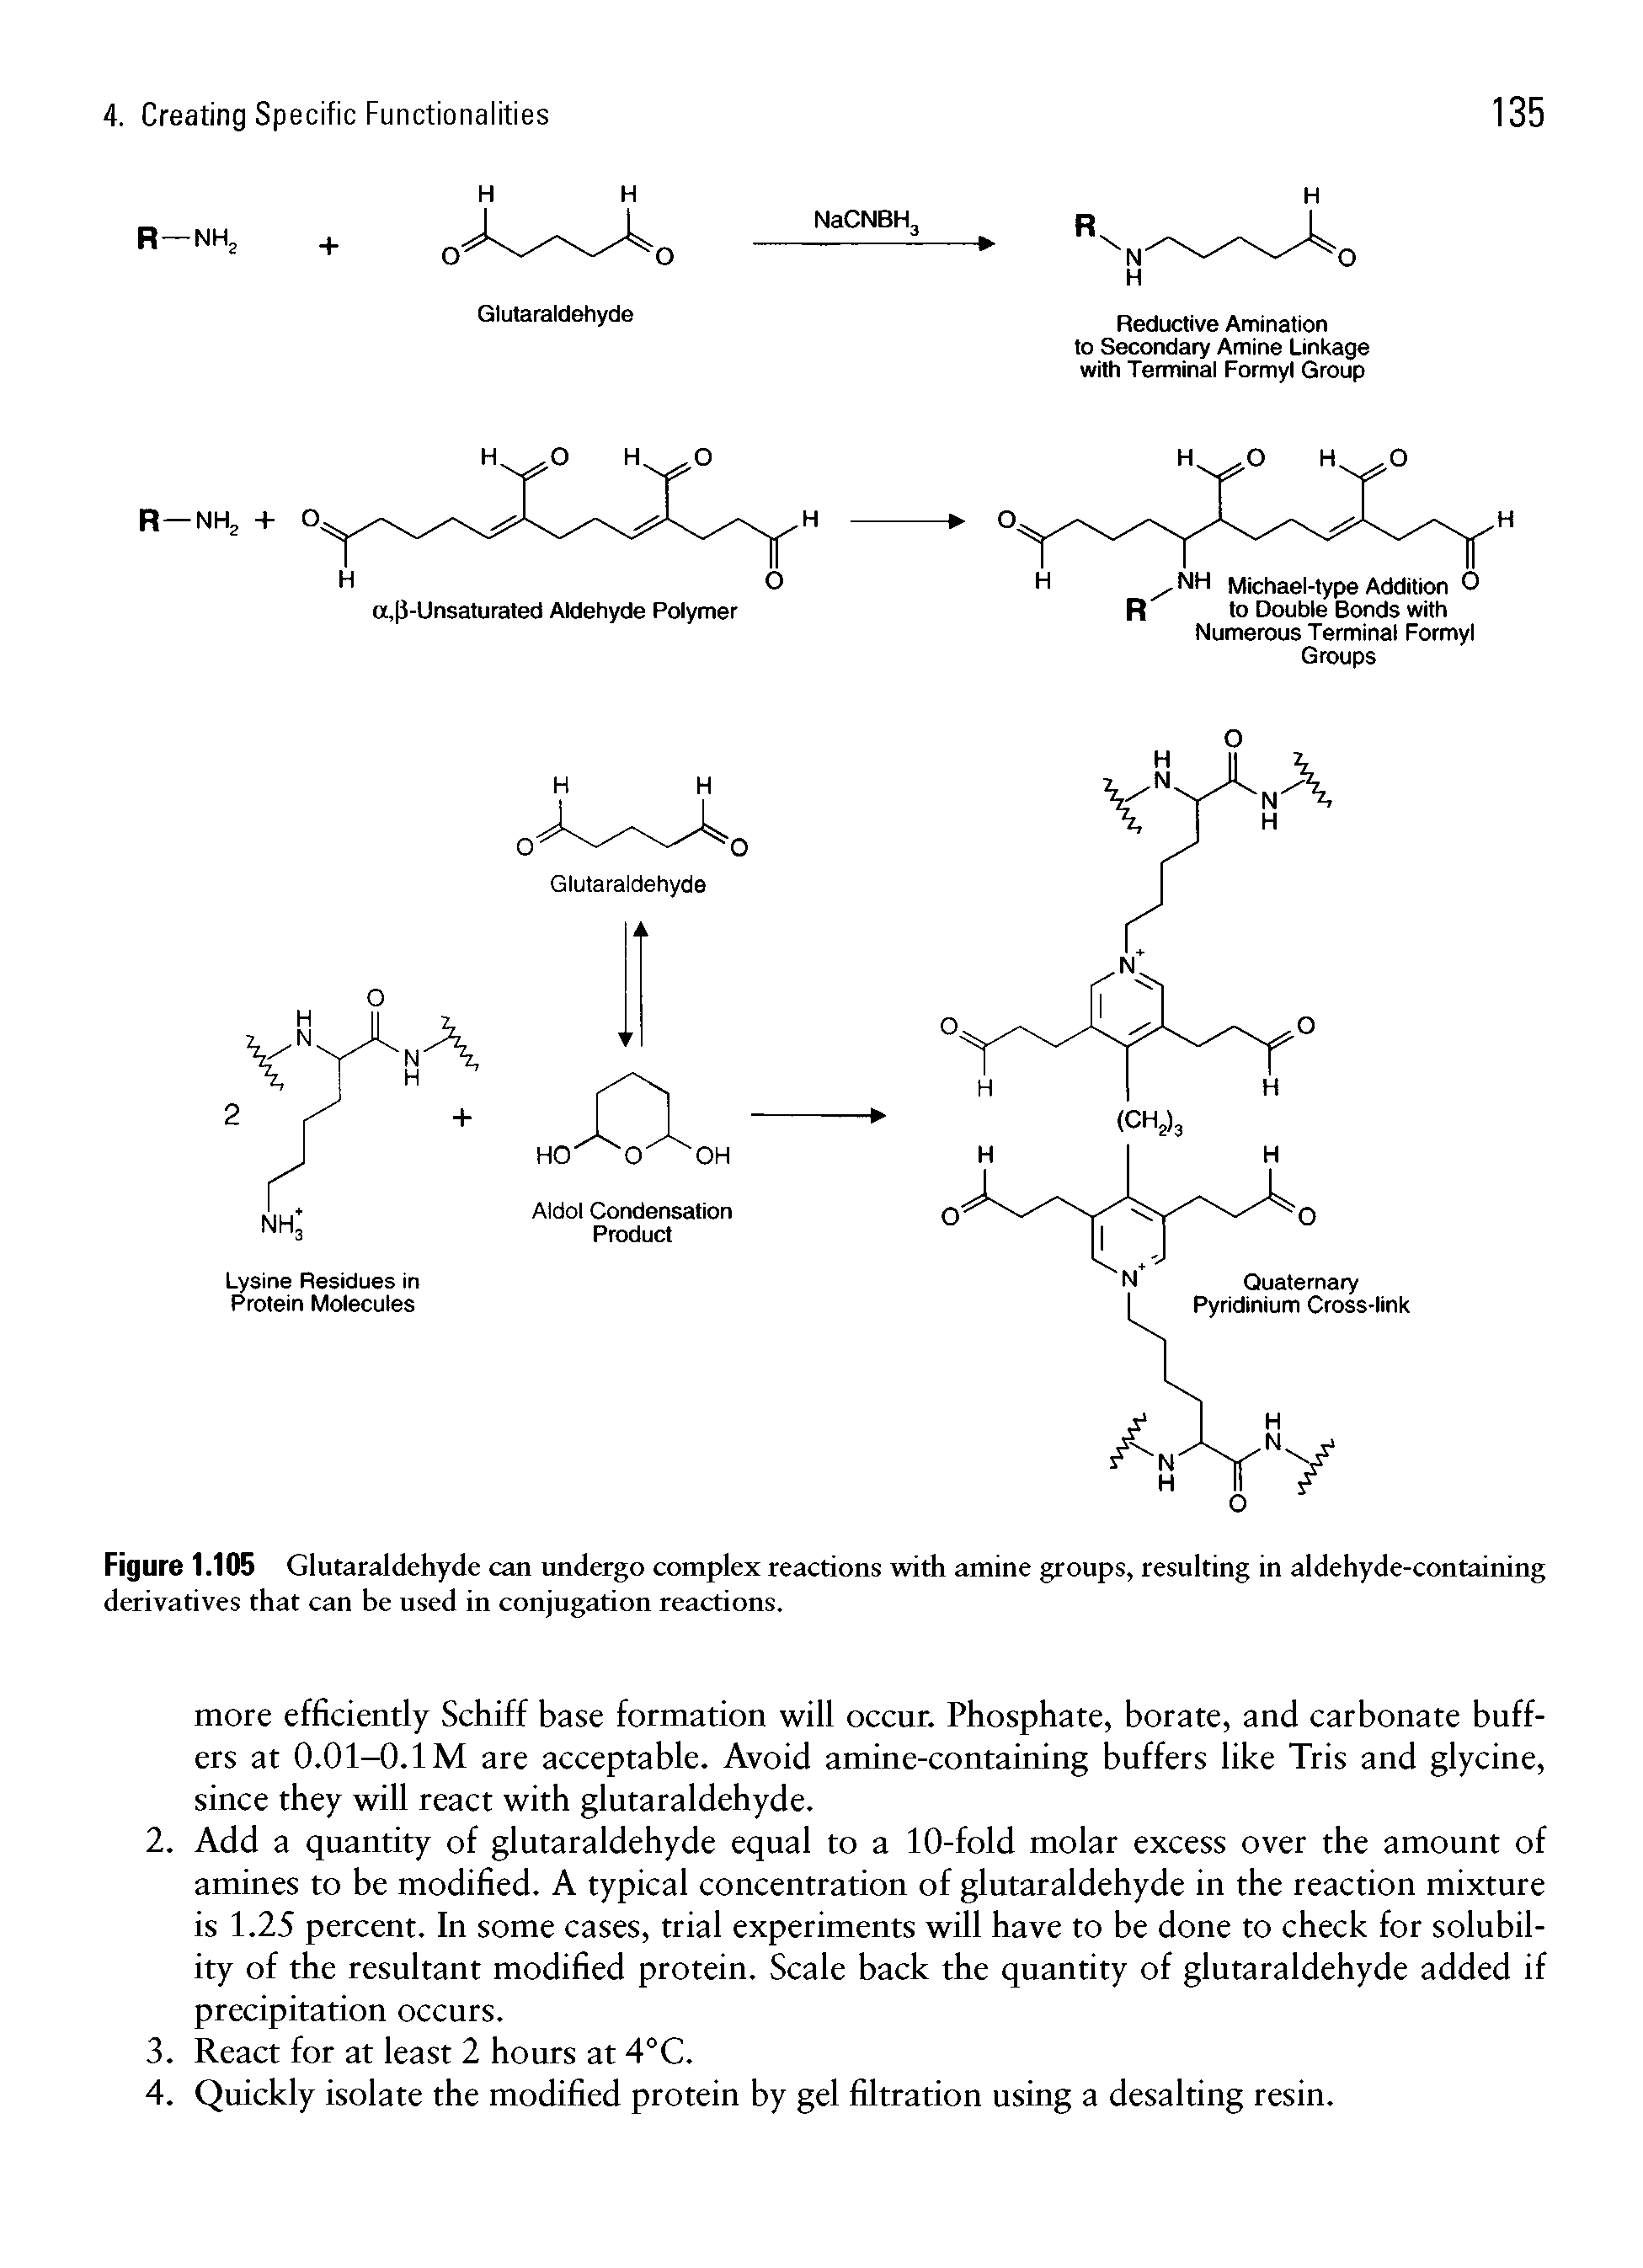 Figure 1.105 Glutaraldehyde can undergo complex reactions with amine groups, resulting in aldehyde-containing derivatives that can be used in conjugation reactions.